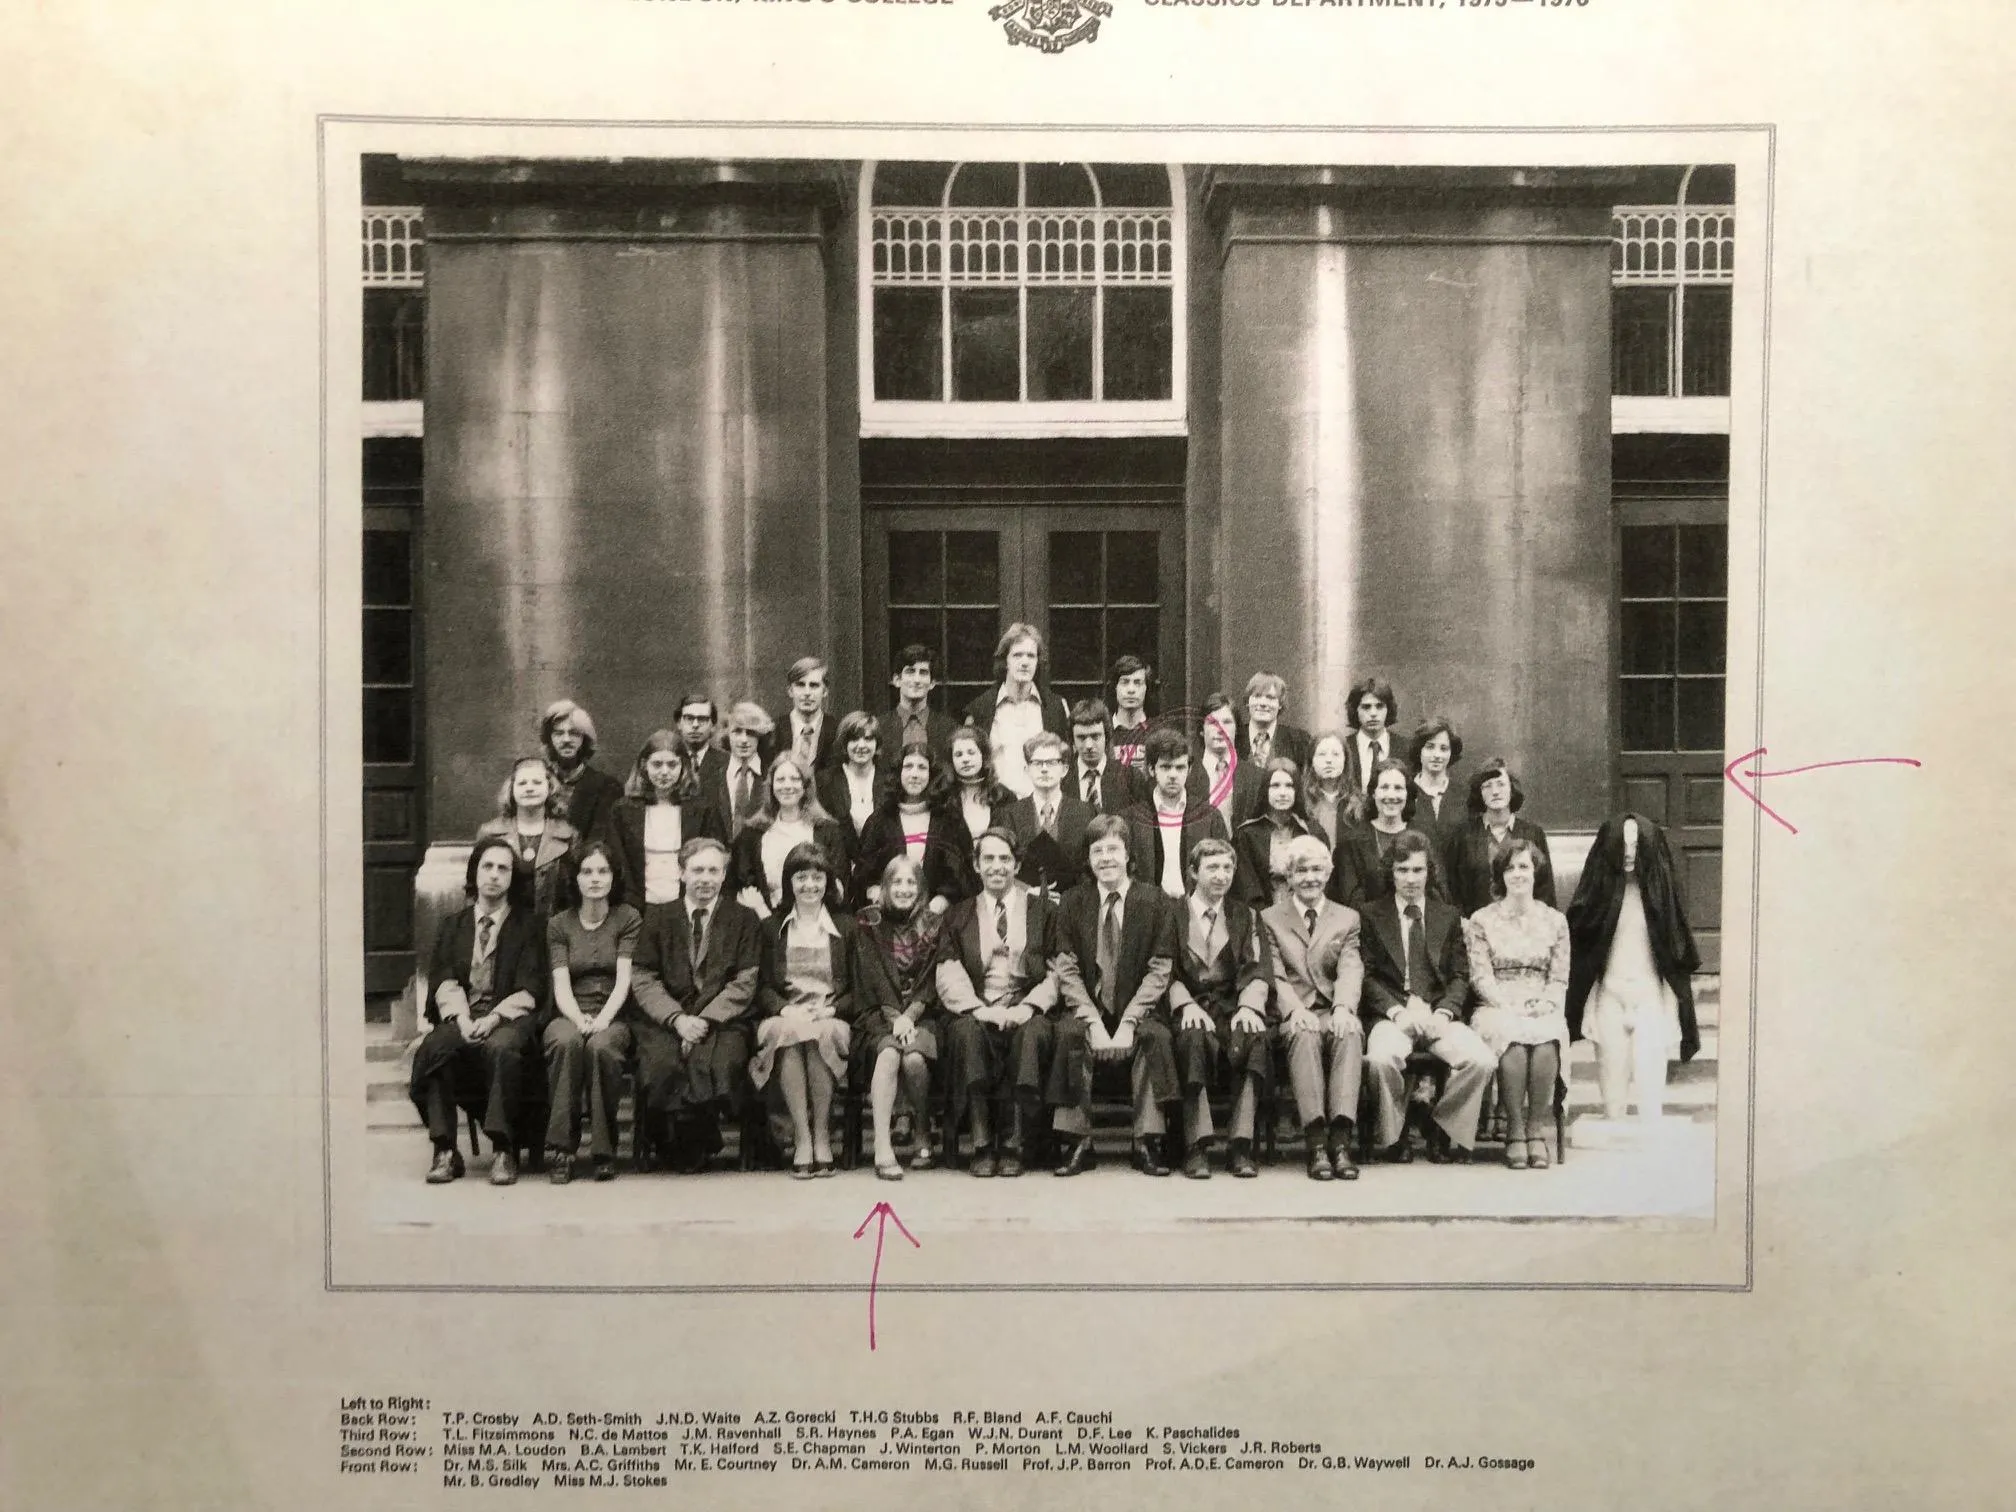 Classics department group photo 1975-1976 with red arrows and circles to show where Mary and Philip are in the group of students.